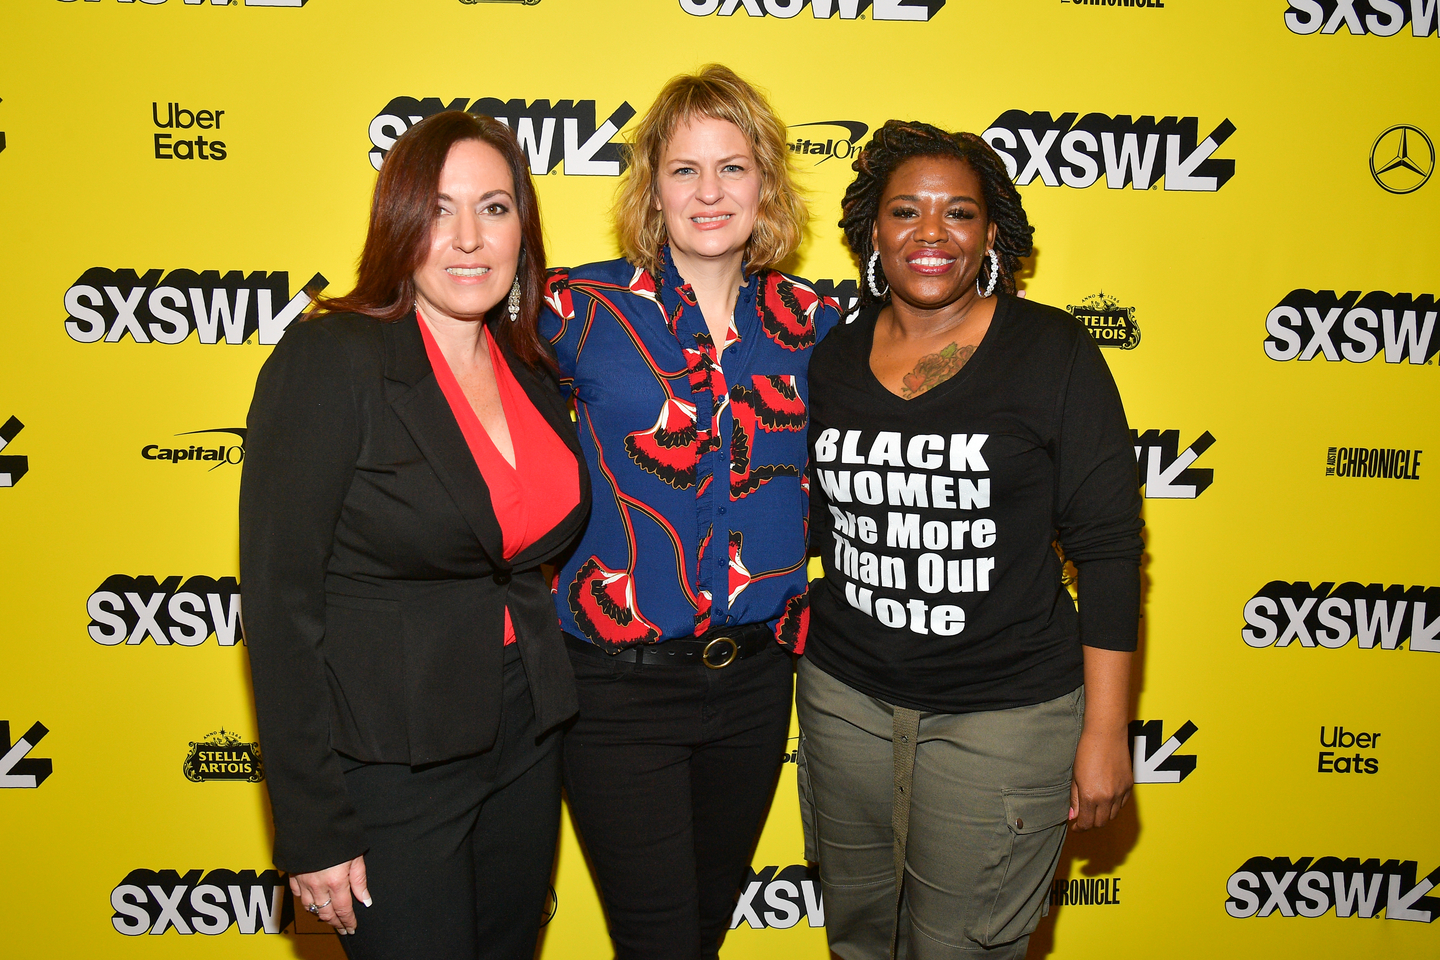 Amy Vilela, Sarah Olson, and Cori Bush at the Knock Down The House Screening – Photo by Matt Winkelmeyer/Getty Images for SXSW